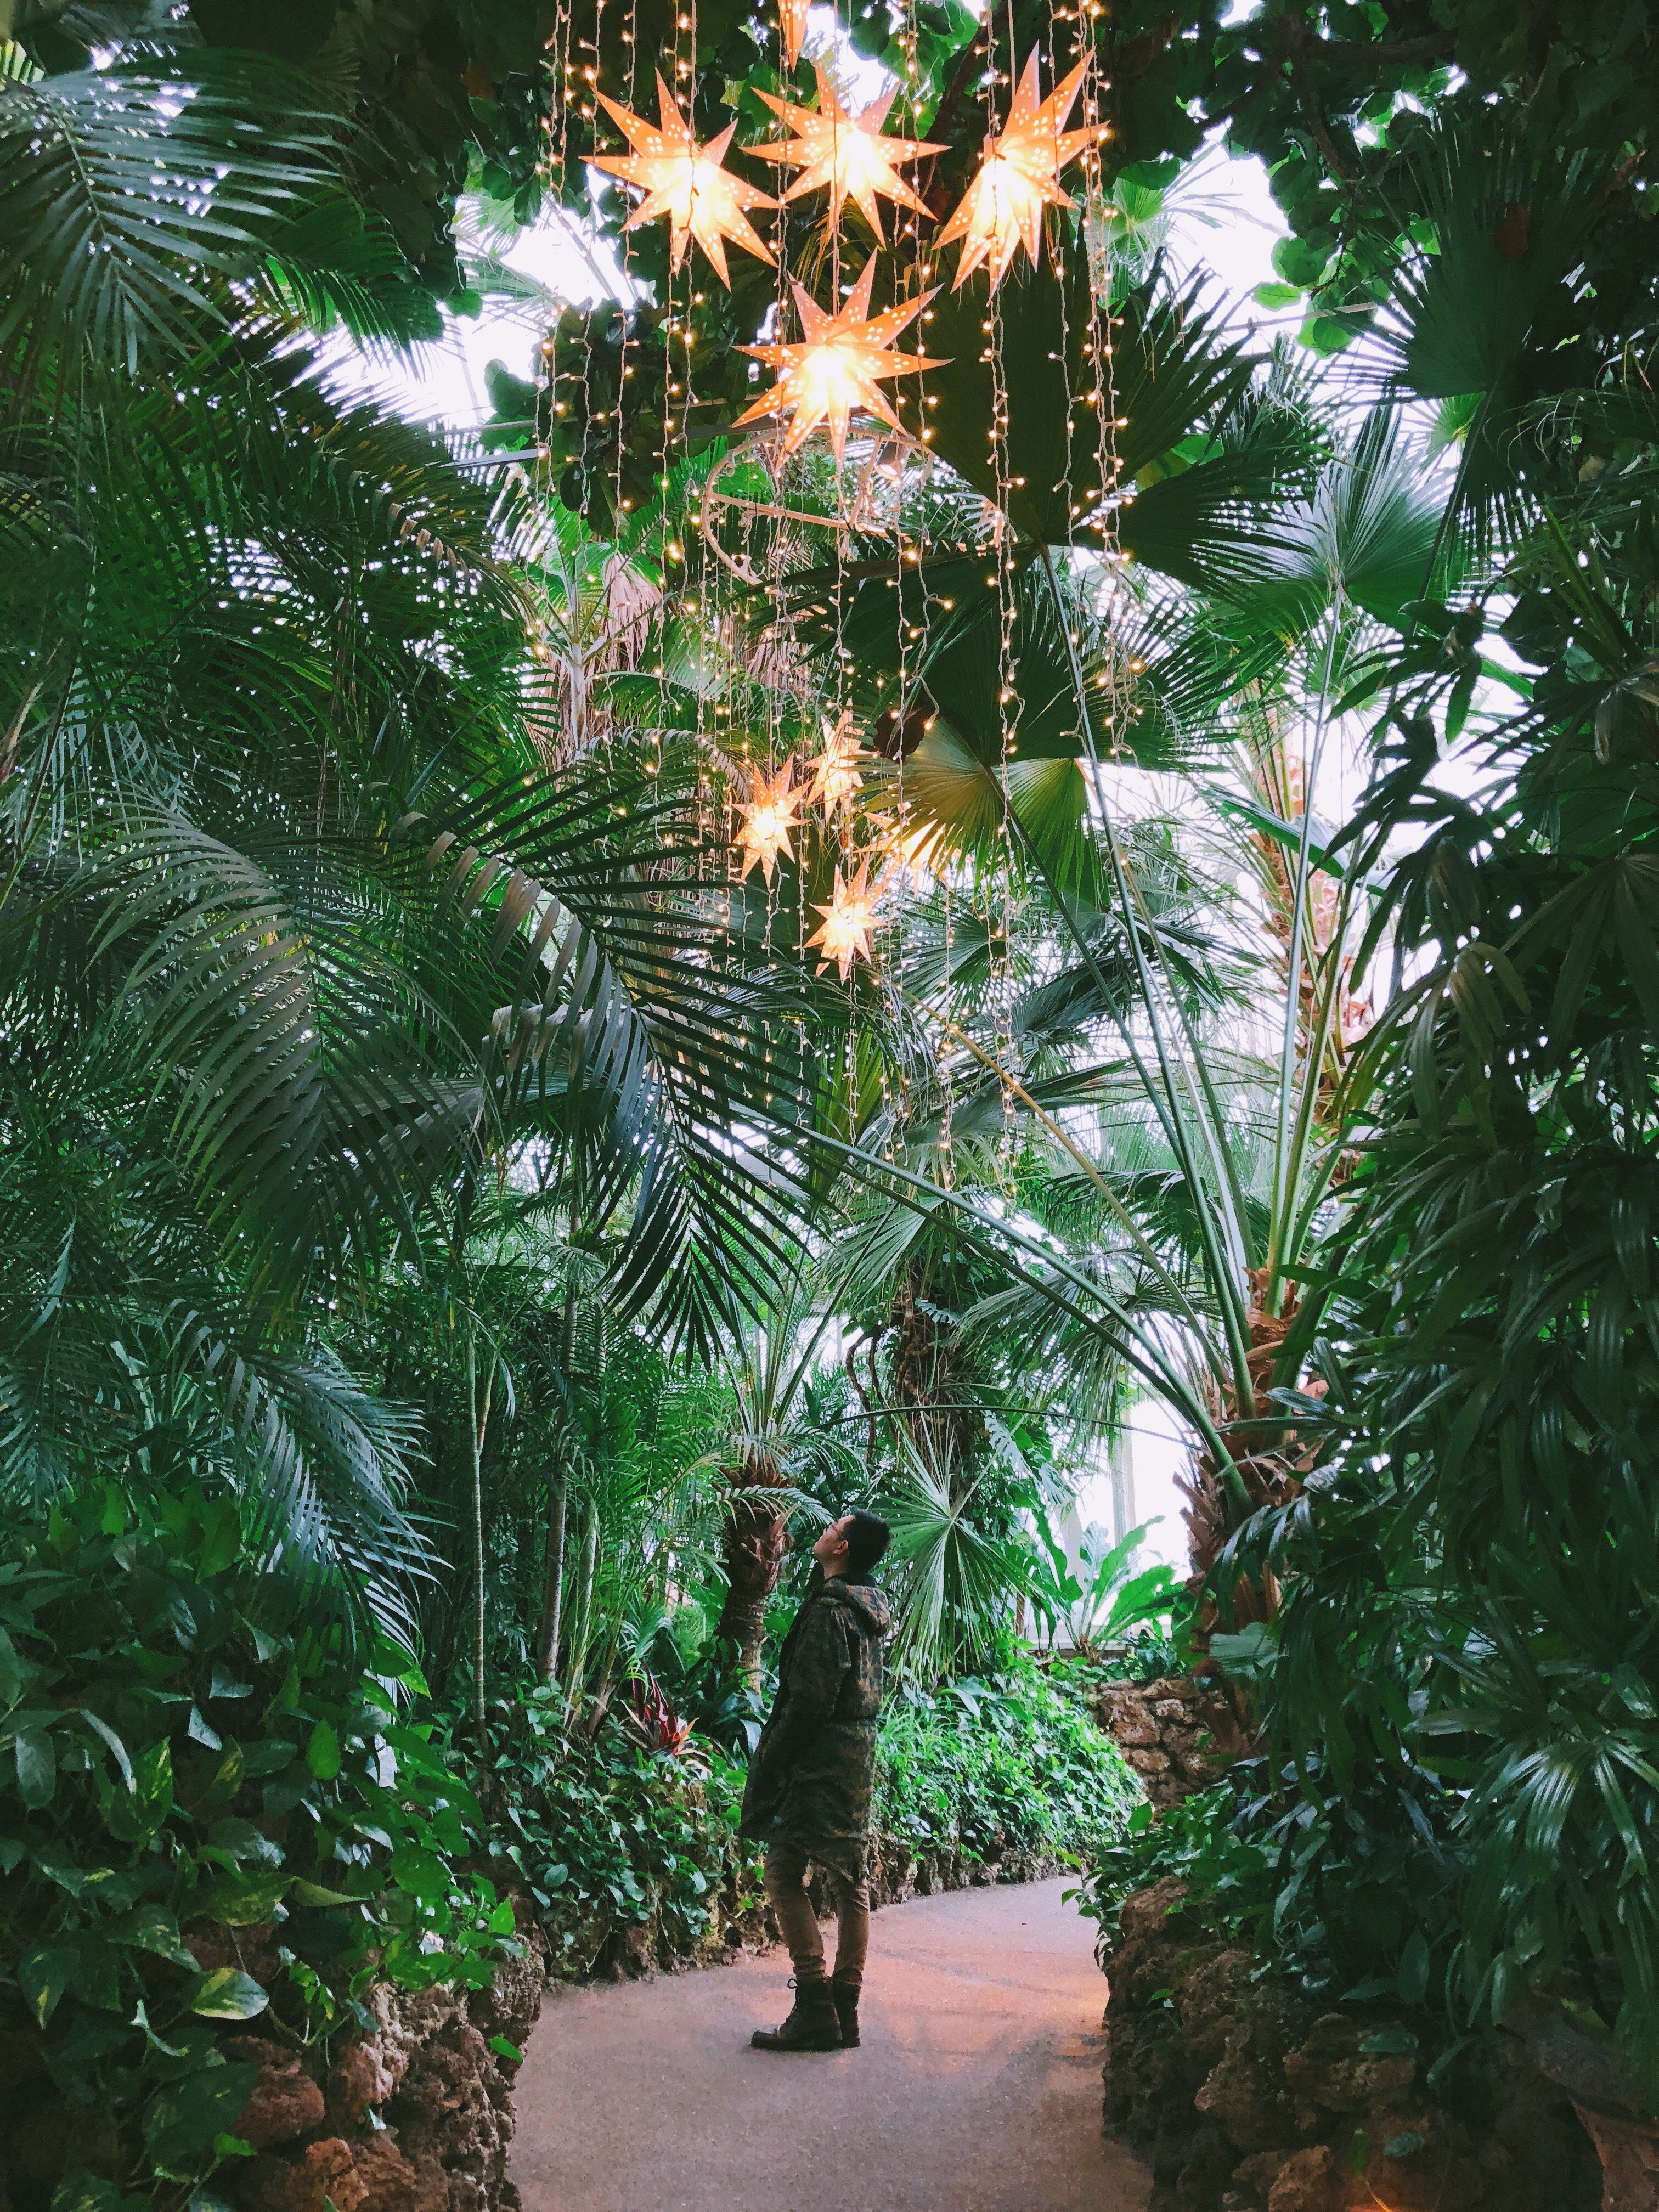 Located in Oakland in Pittsburgh, PA, the Phipps Conservatory and Botanical Gardens is one of the most stunning places to visit in Pittsburgh.